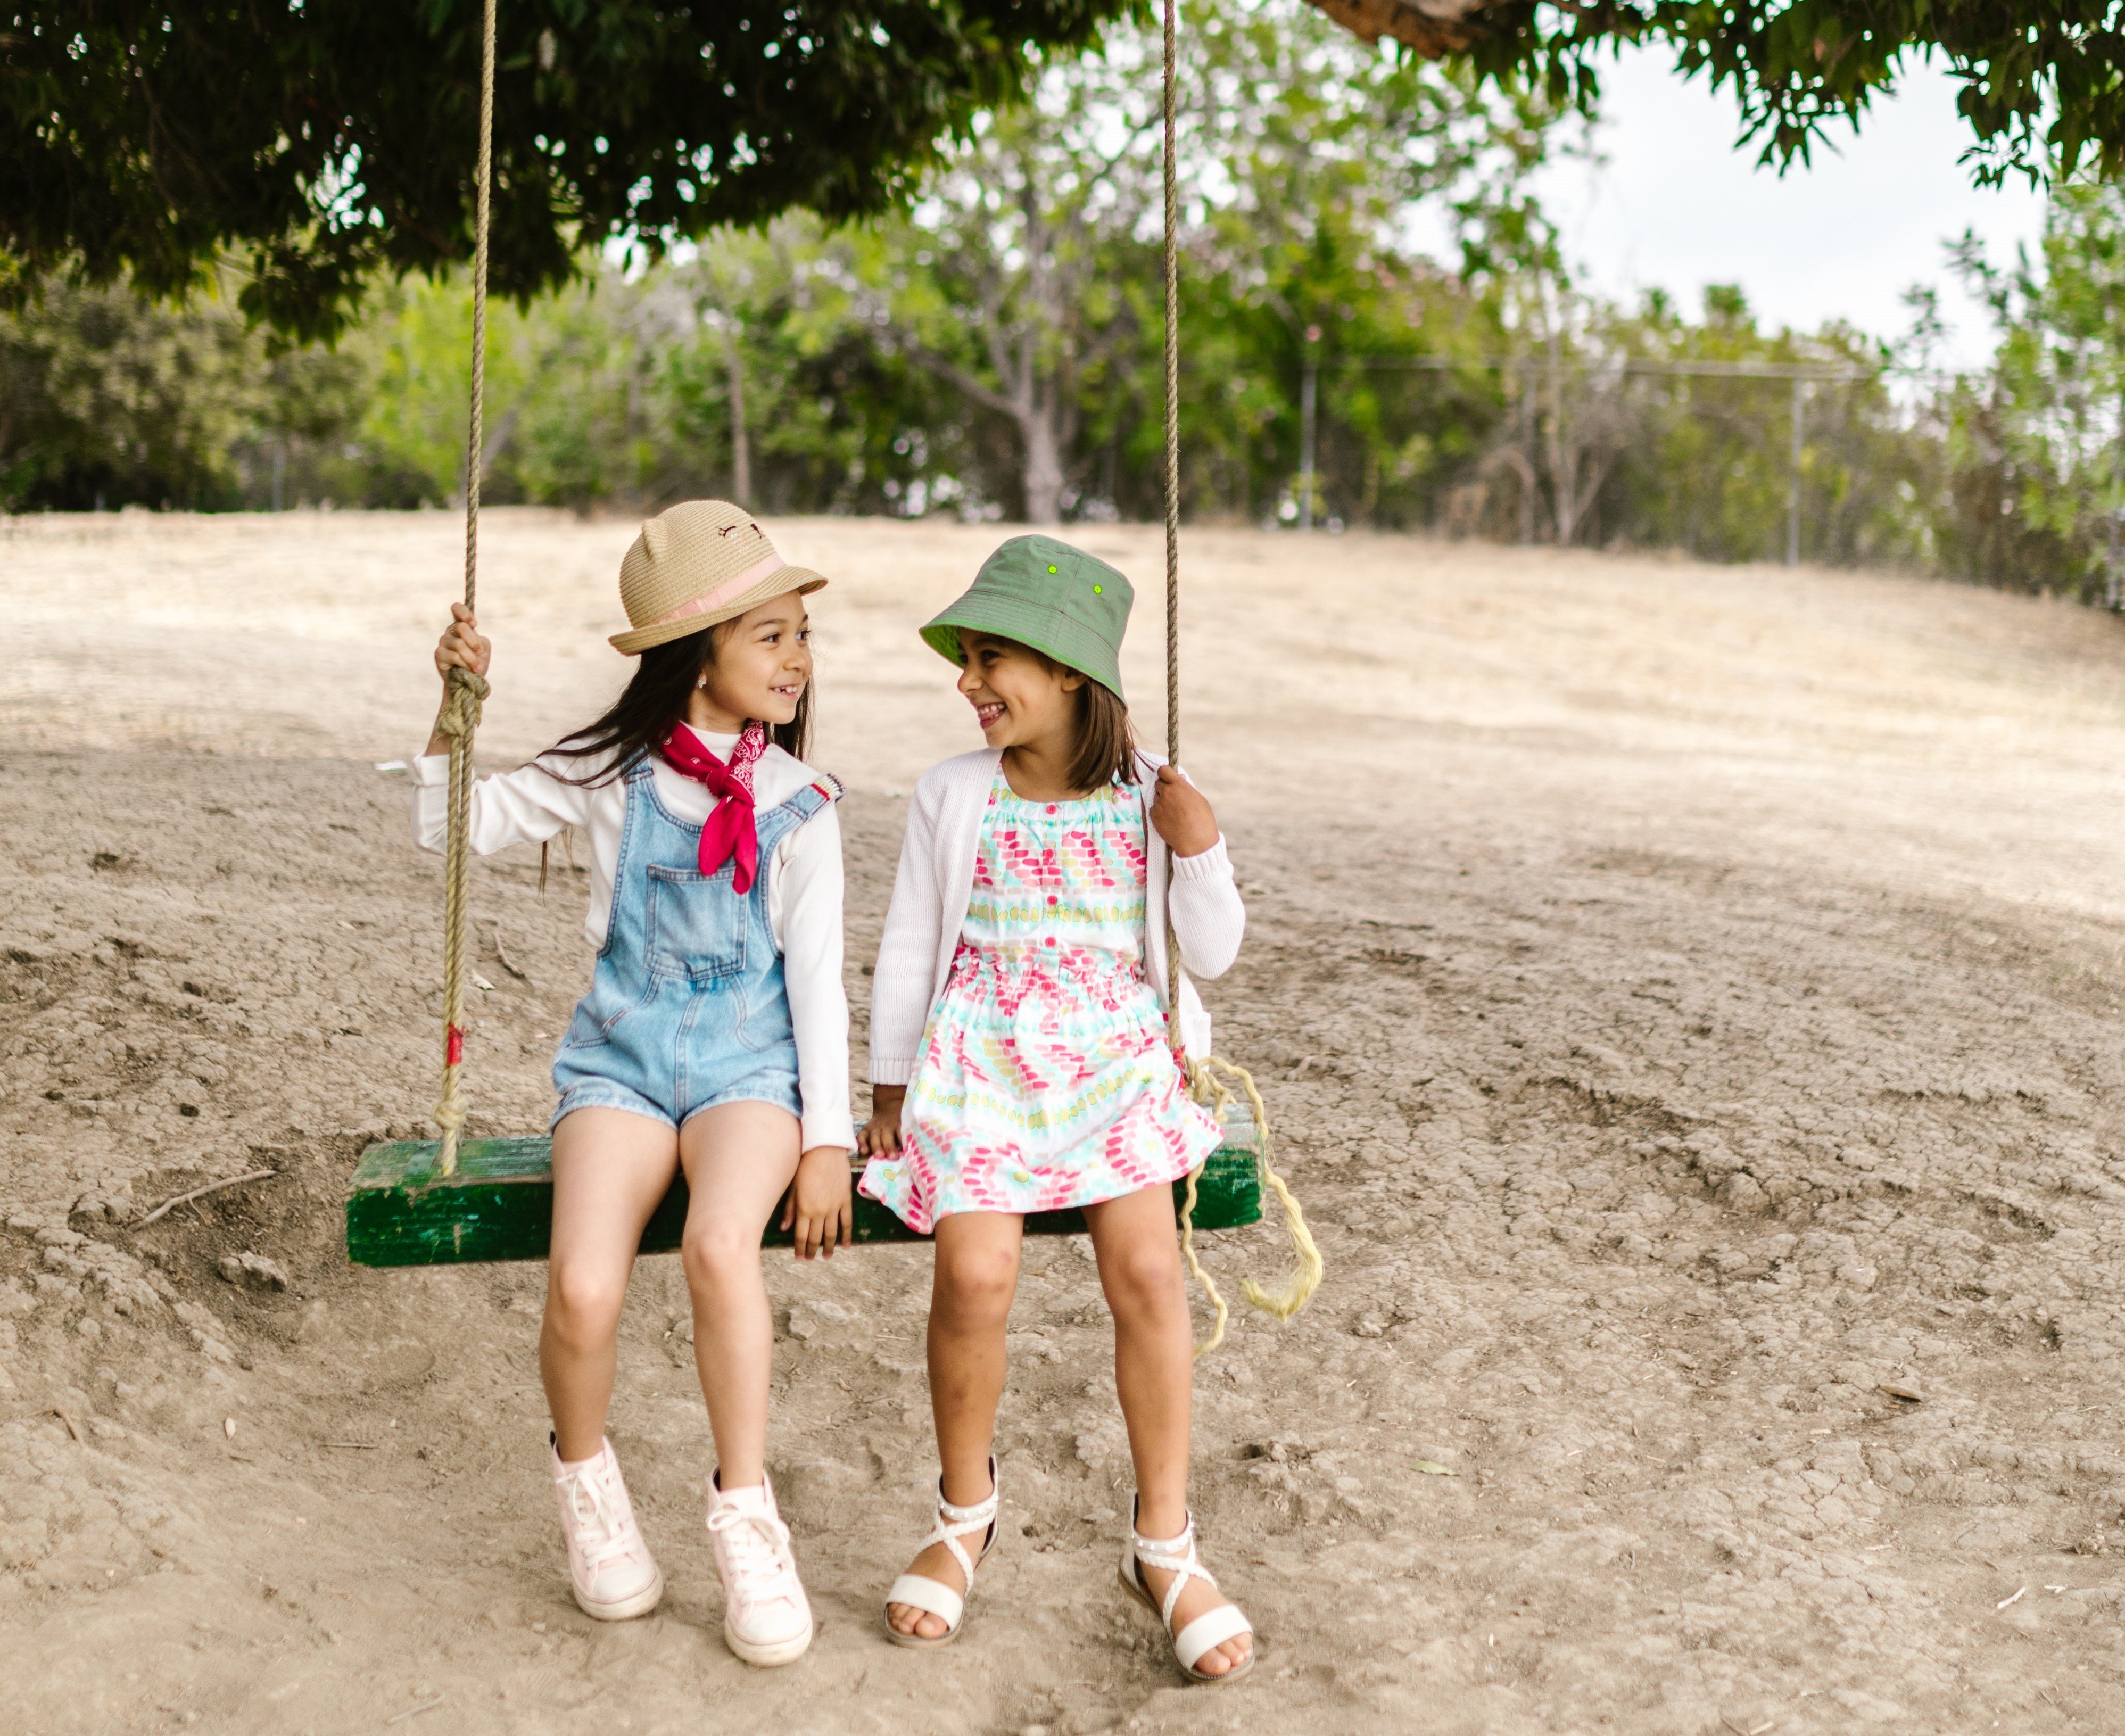 Corey paid Tom's favor forward by making a swing for the two girls. | Source: Pexels